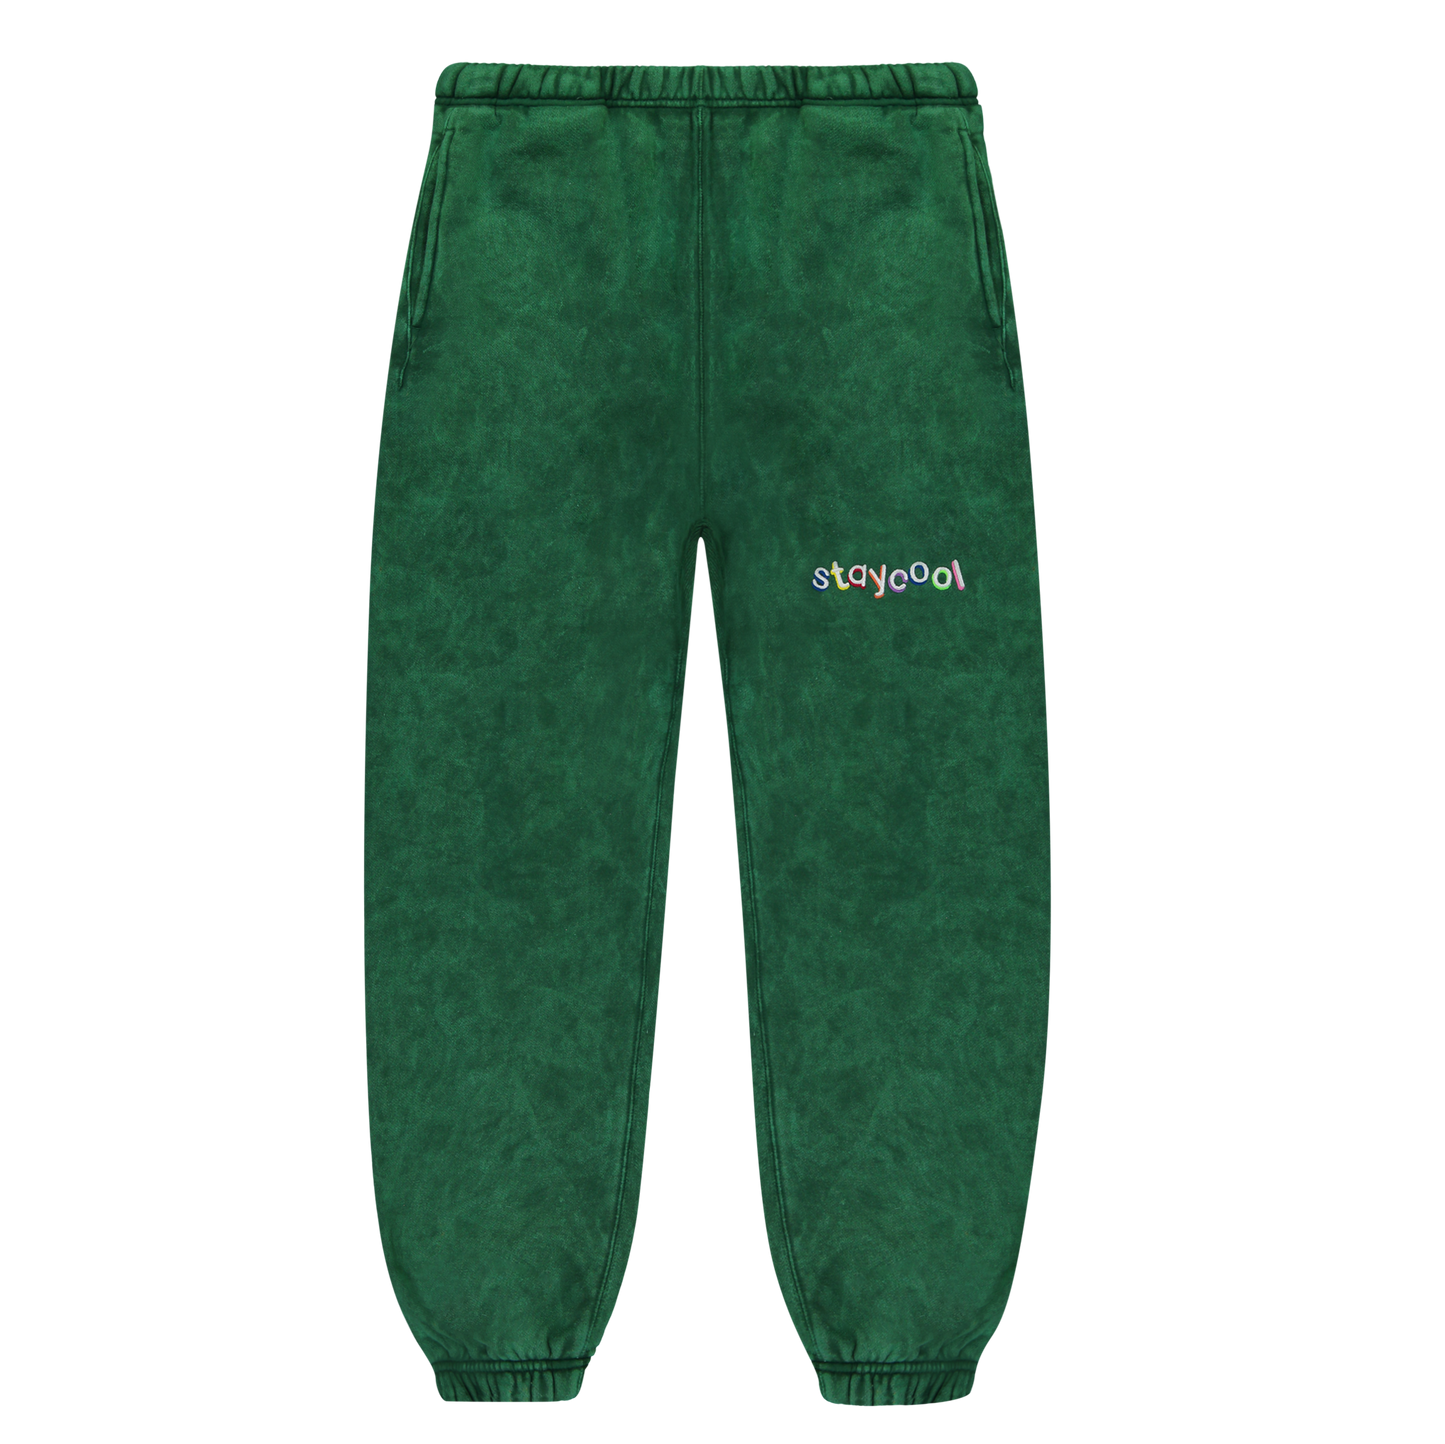 Classic Sweatpants (Forest Mineral Wash)